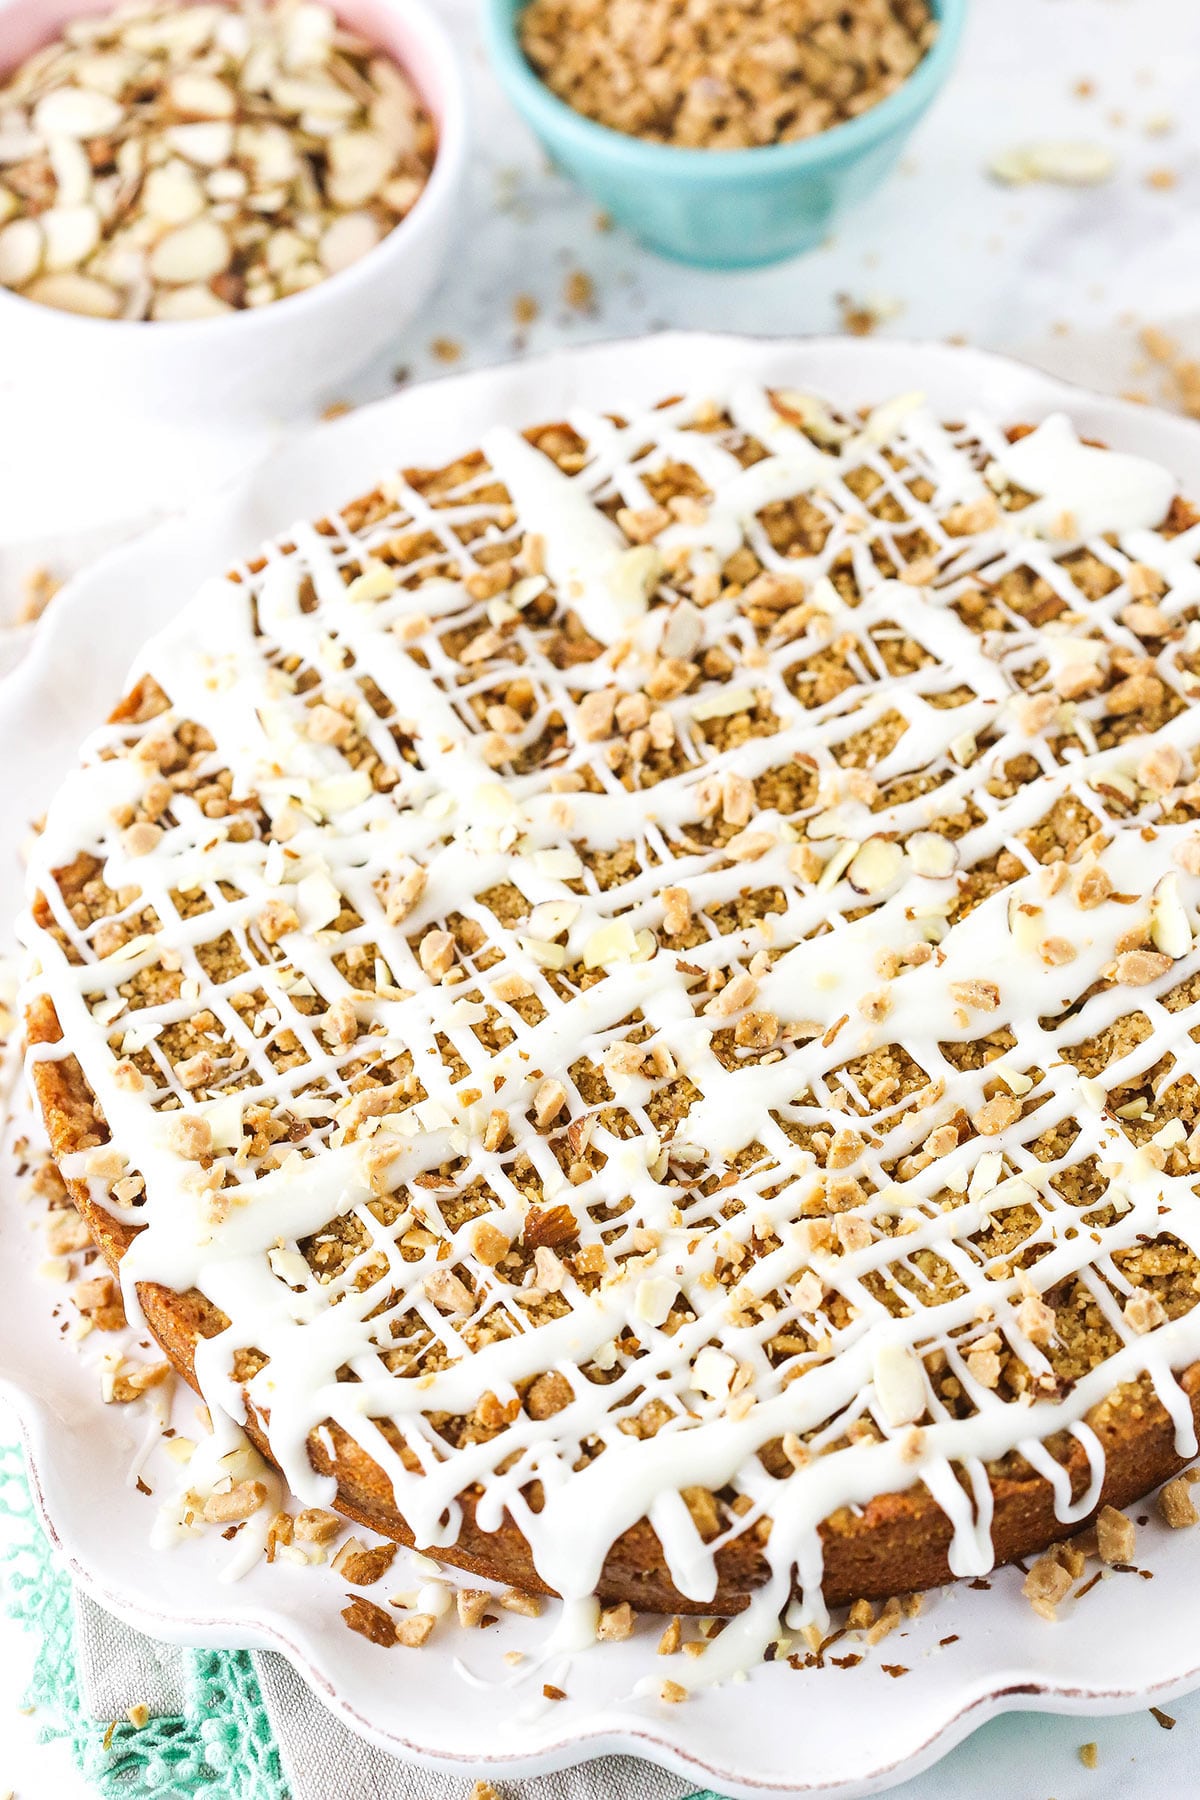 A coffee cake covered in drizzles of glaze, slivered almonds and toffee bits